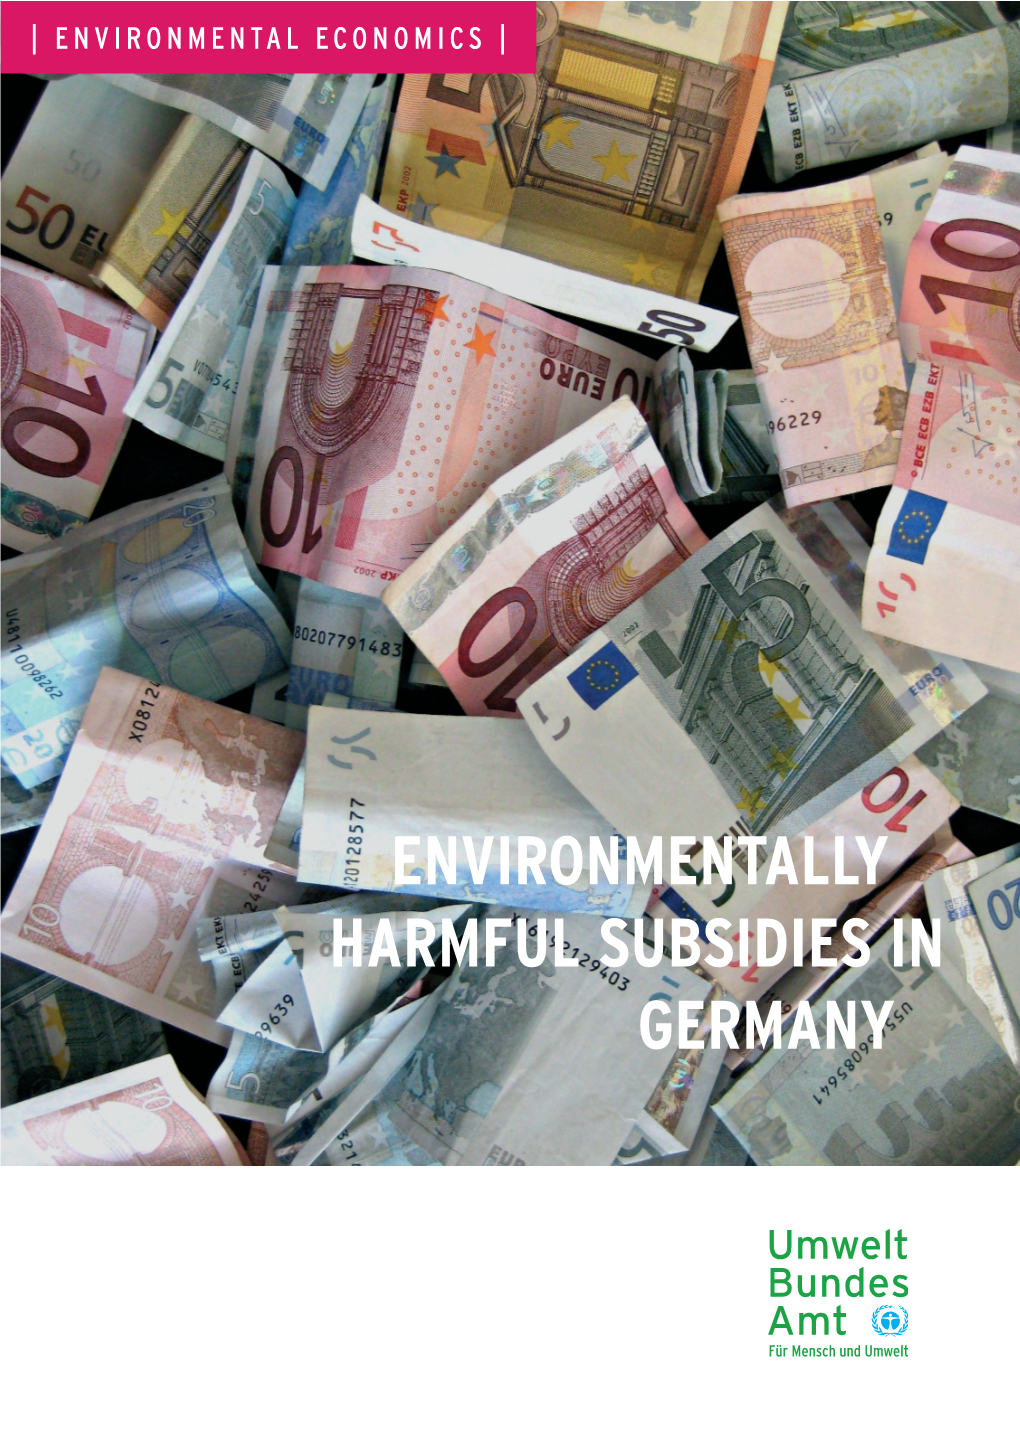 ENVIRONMENTALLY HARMFUL SUBSIDIES in GERMANY This Publication Is a Translation of "Umweltschädliche Subventionen in Deutschland"